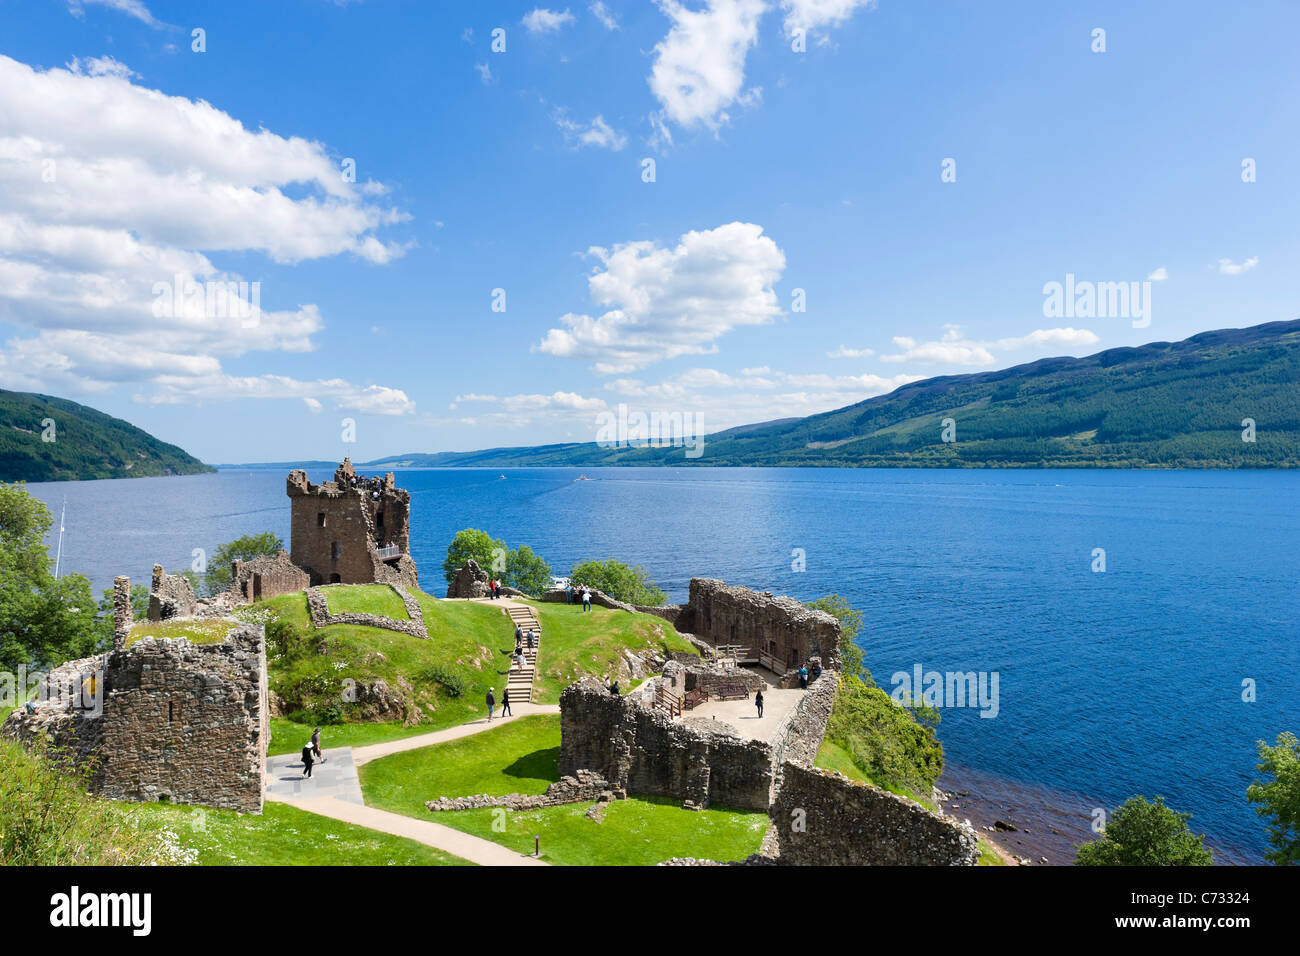 The ruins of Urquhart Castle on the western shore of Loch Ness (site of many Nessie sightings), near Drumnadrochit, Scotland, UK. Scottish castles. Stock Photo